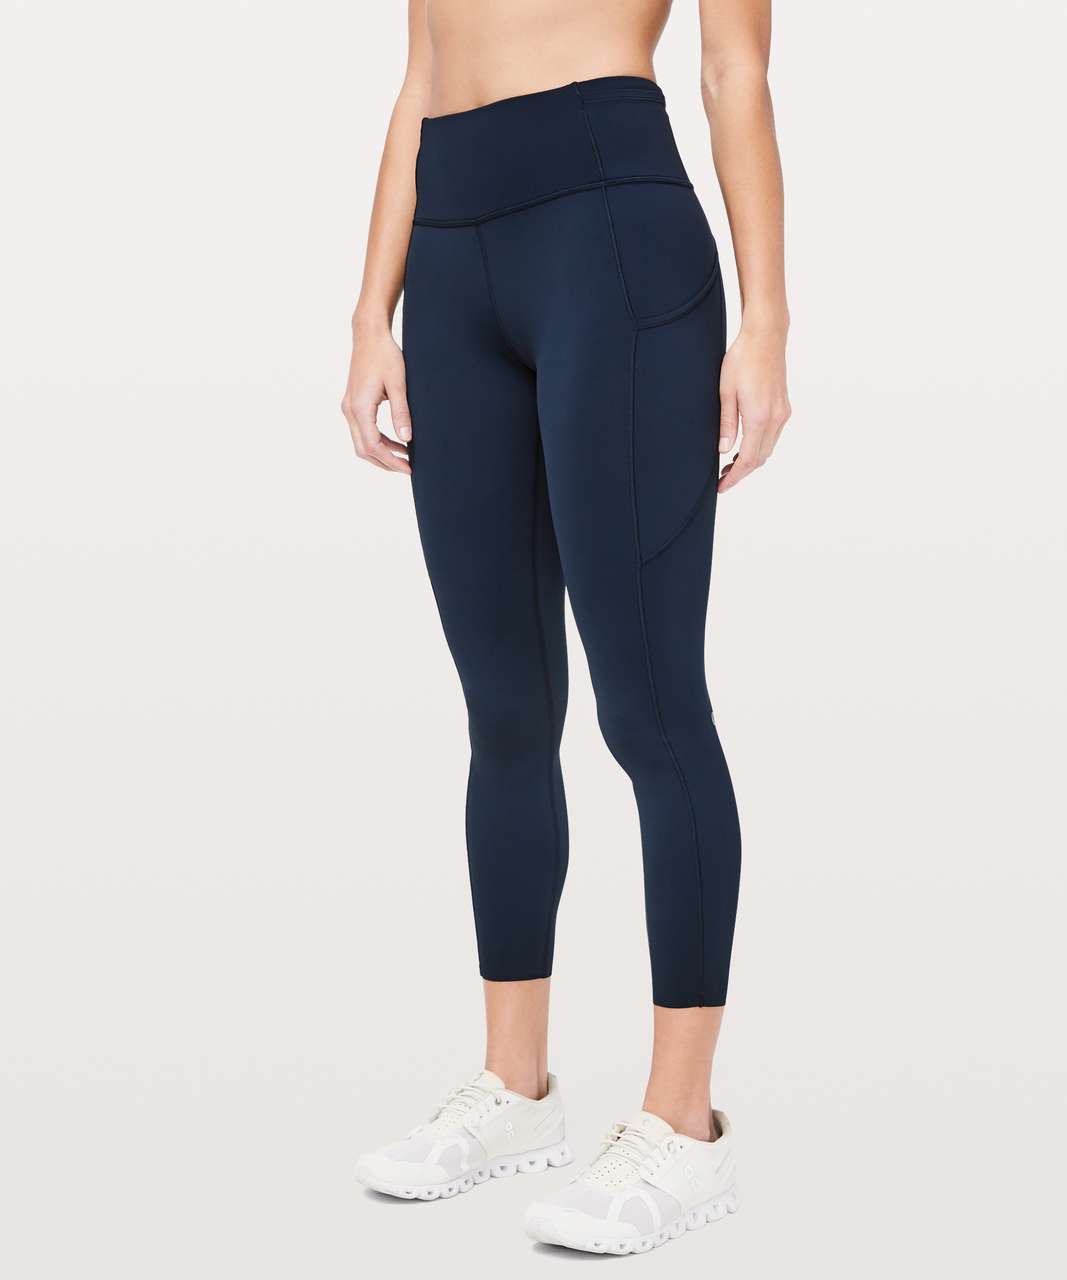 Lululemon Fast and Free HR 7/8 Tight 25” New NWT